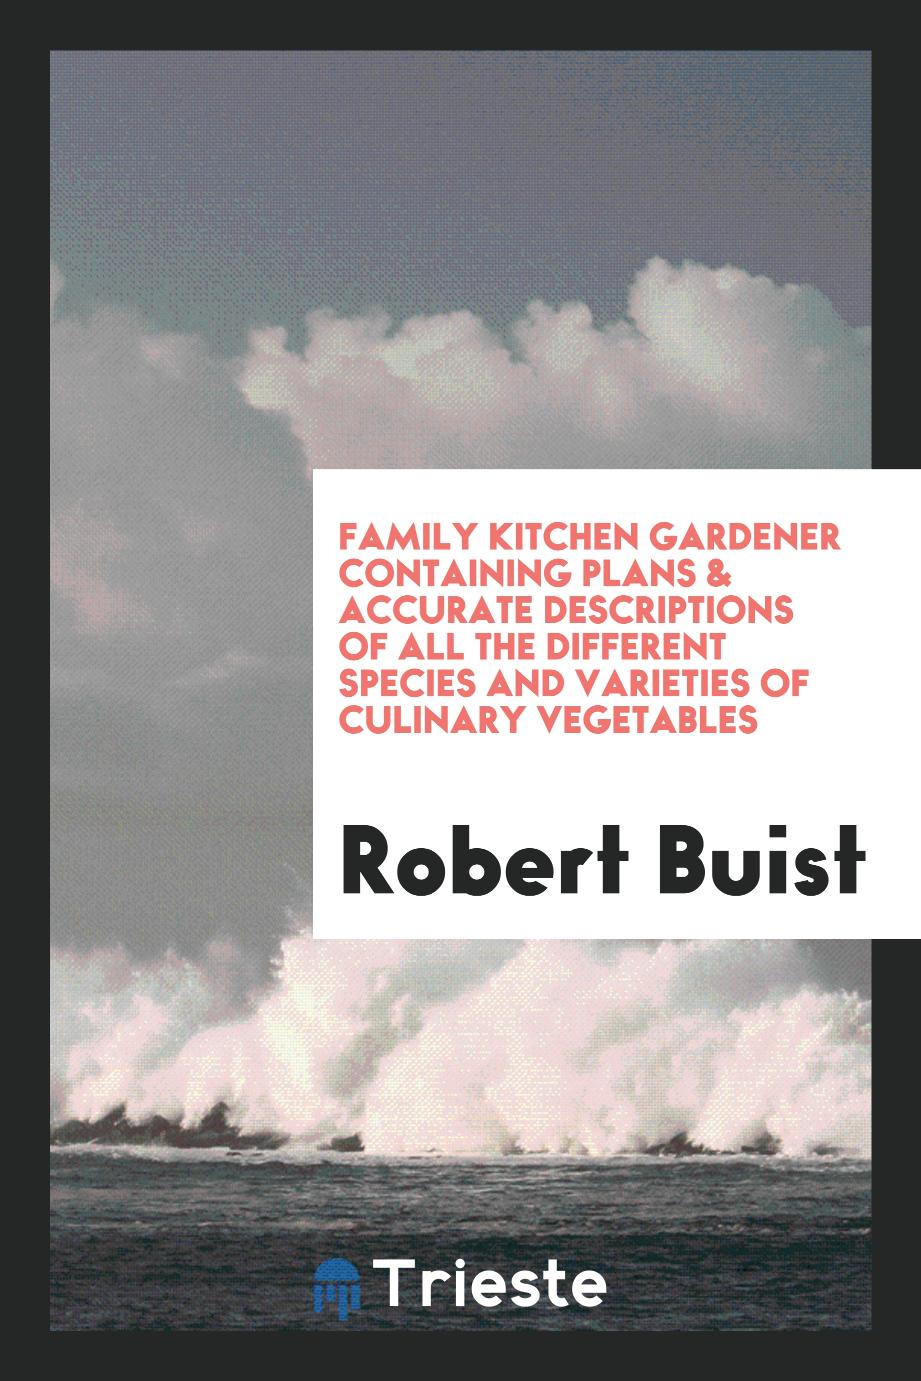 Robert Buist - Family Kitchen Gardener Containing Plans & Accurate Descriptions of All the Different Species and Varieties of Culinary Vegetables